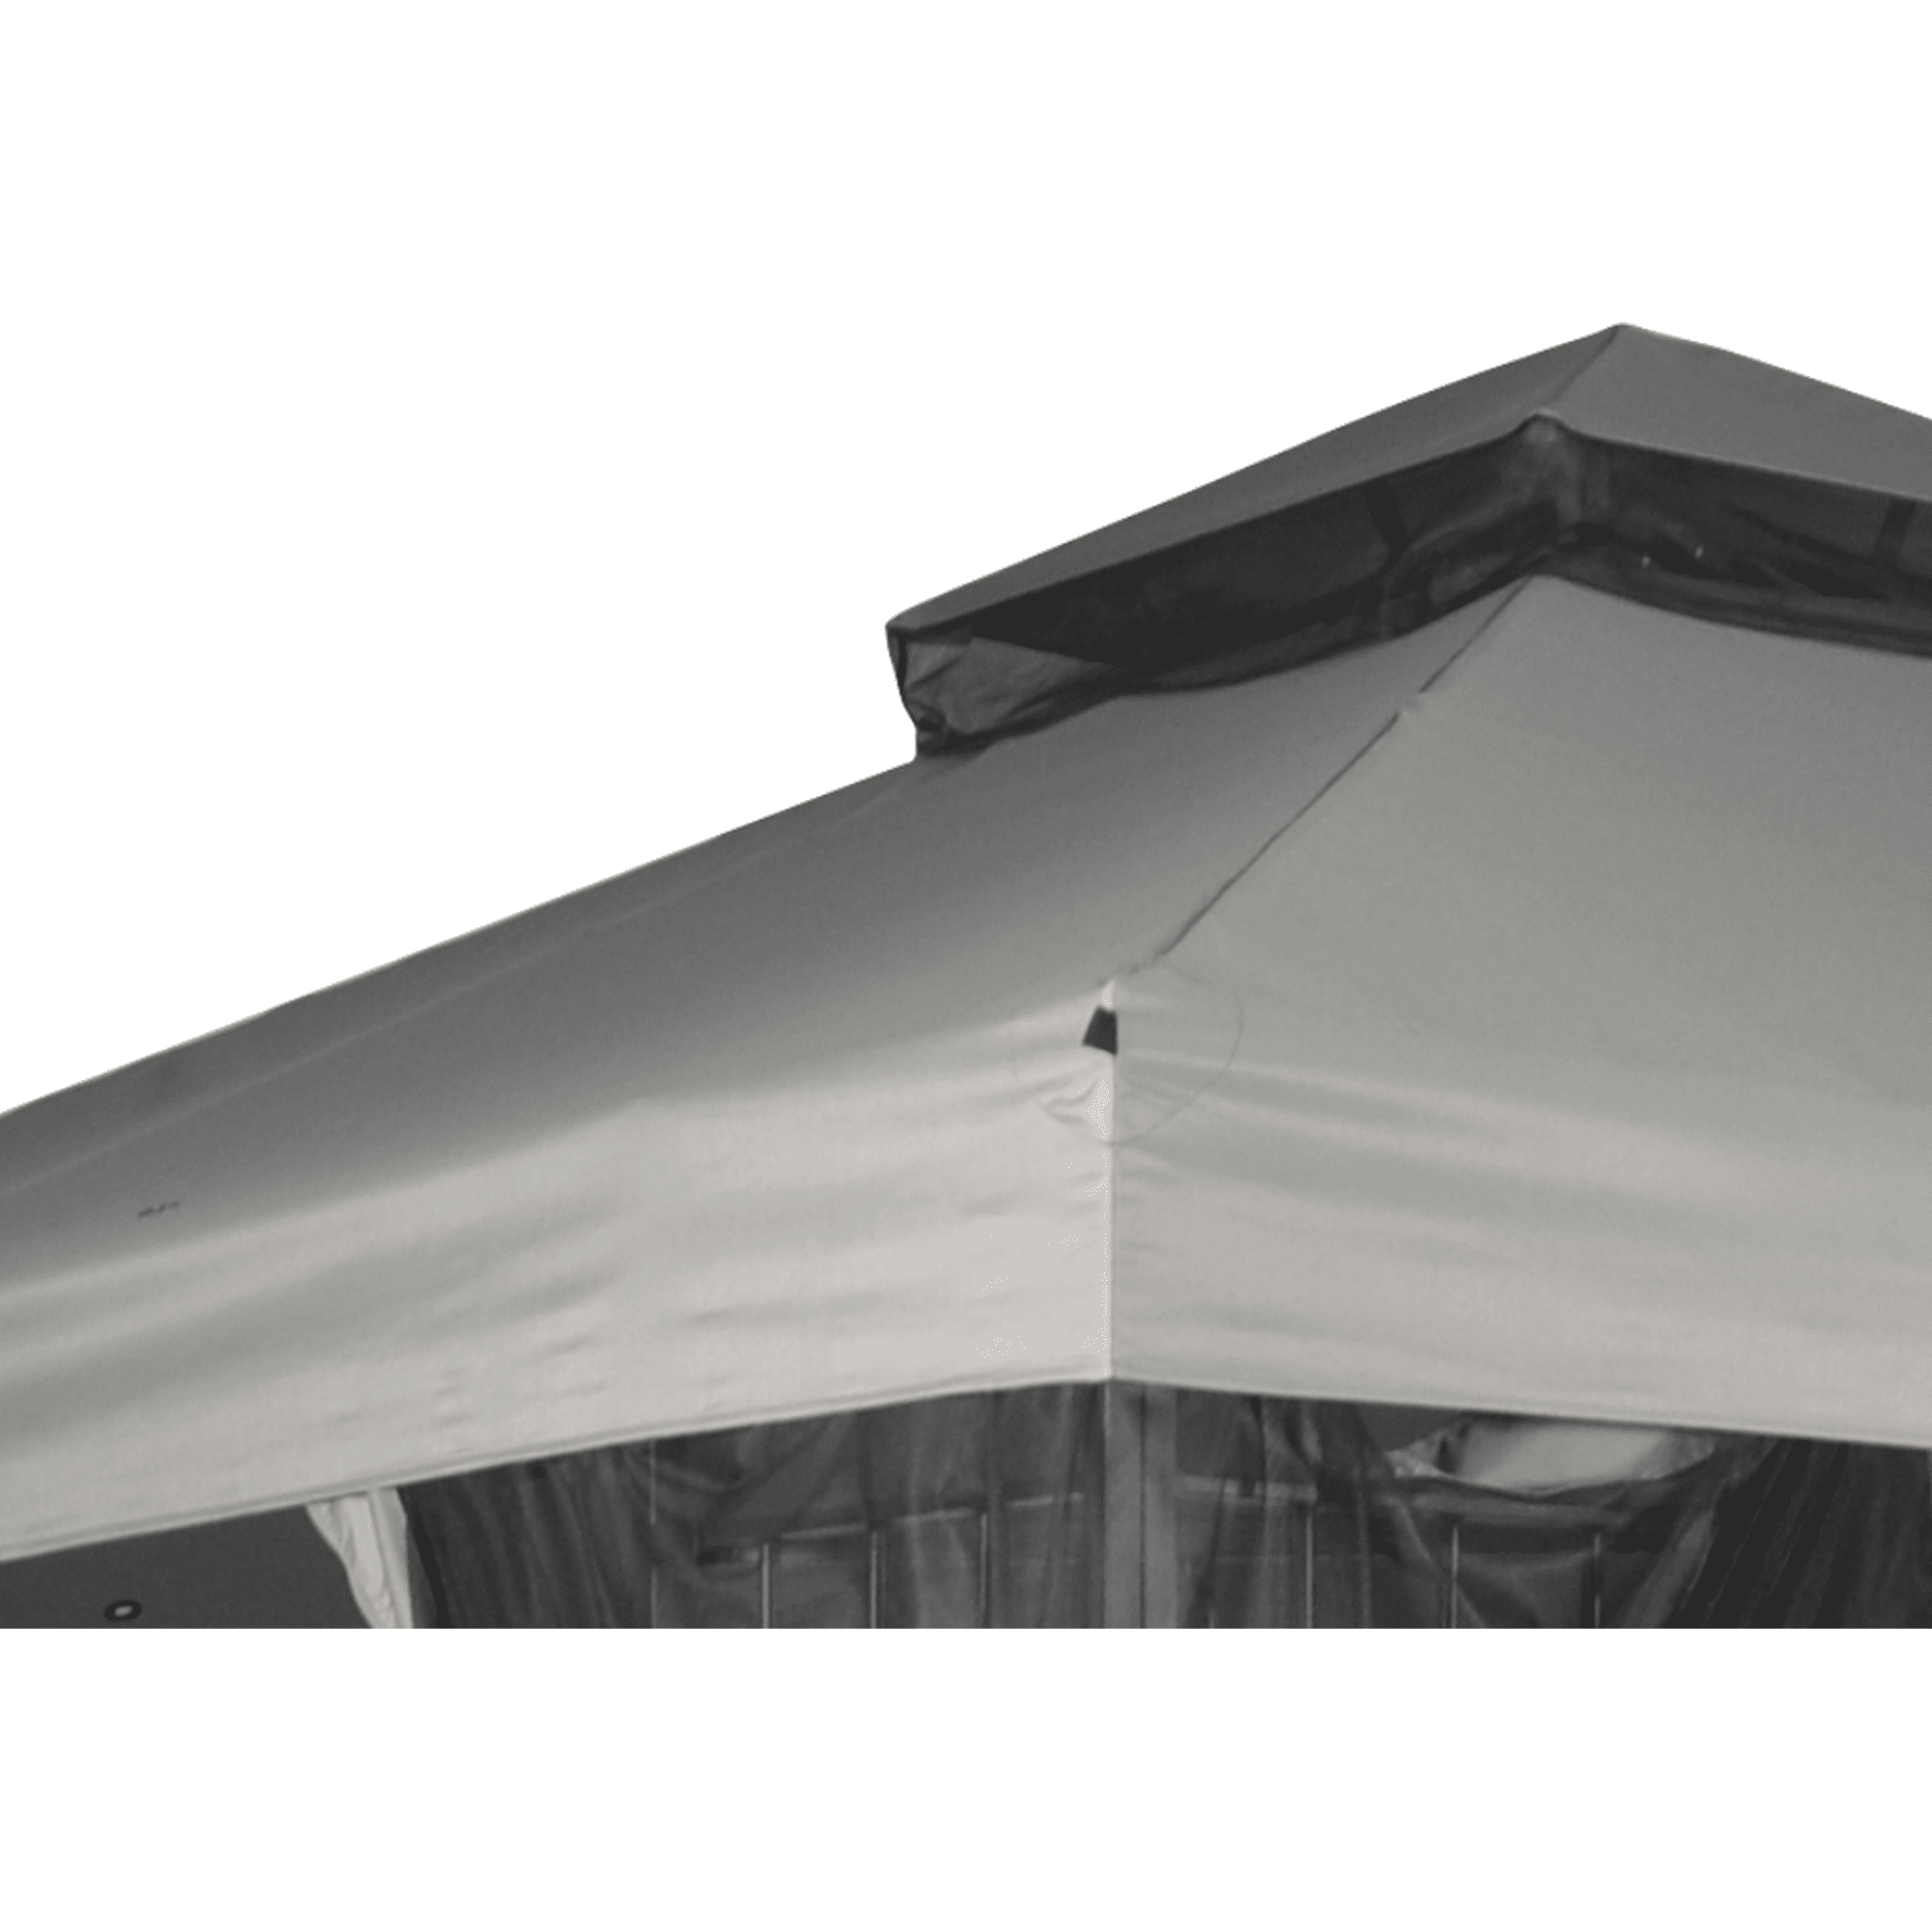 Mainstays 10FT x 10FT EZ Gazebo Replacement Canopy